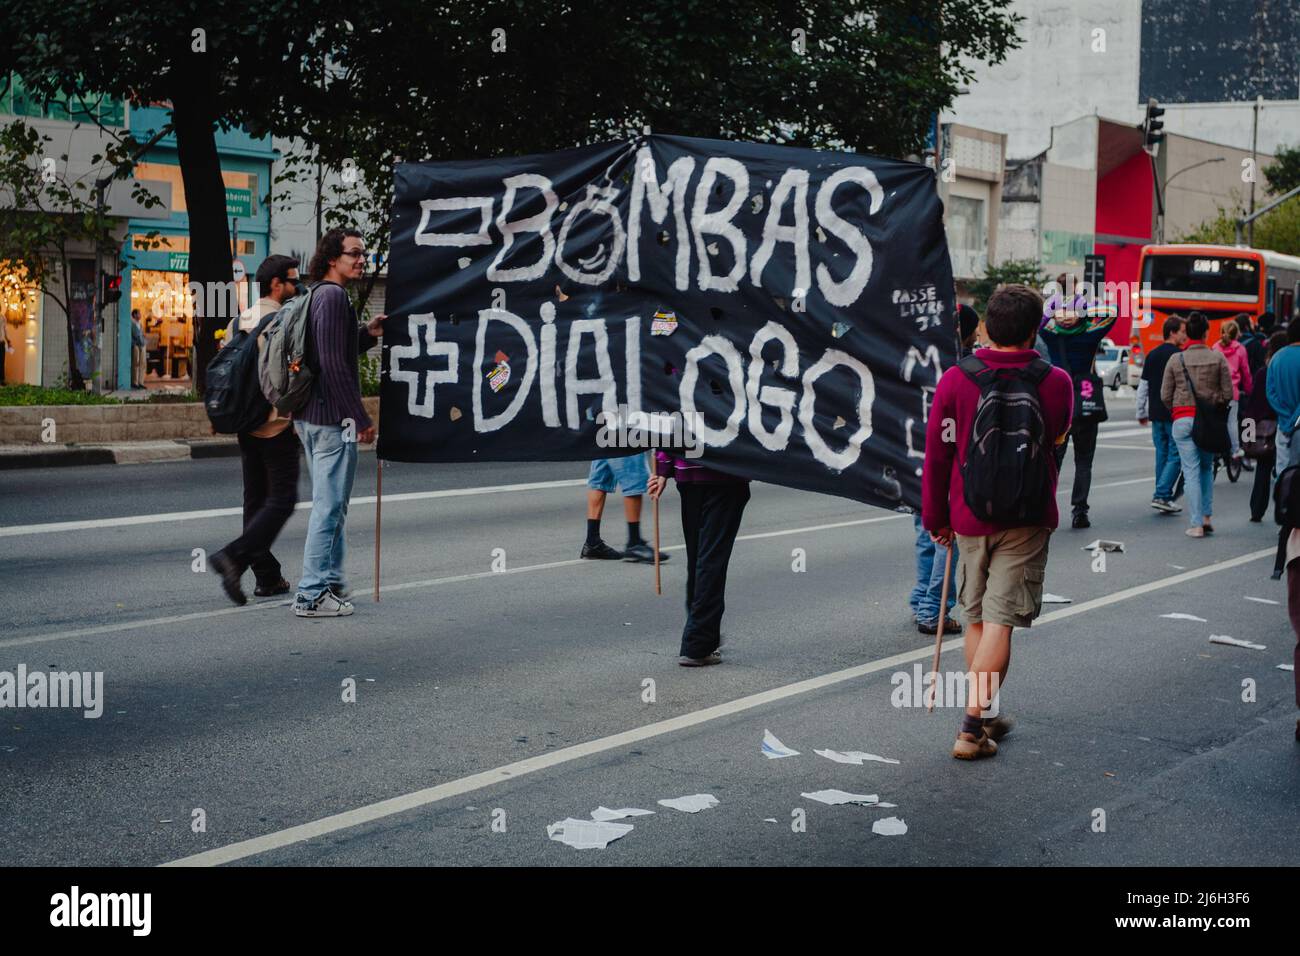 Sao Paulo, Brazil. 28th May, 2011. Demonstrators march during 'Marcha da Liberdade' (Freedom March) in Sao Paulo, Brazil. Despite the prohibition, the demonstrators were concentrated at MASP. After an initial delay the march set-off following talks between police and and leaders of the march, the protest was released to start at 16:00, since there is no apology to drugs. The Freedom March emerged after the police repression that occurred a week earlier, at the 'Marcha da Maconha' (Marijuana March). Stock Photo